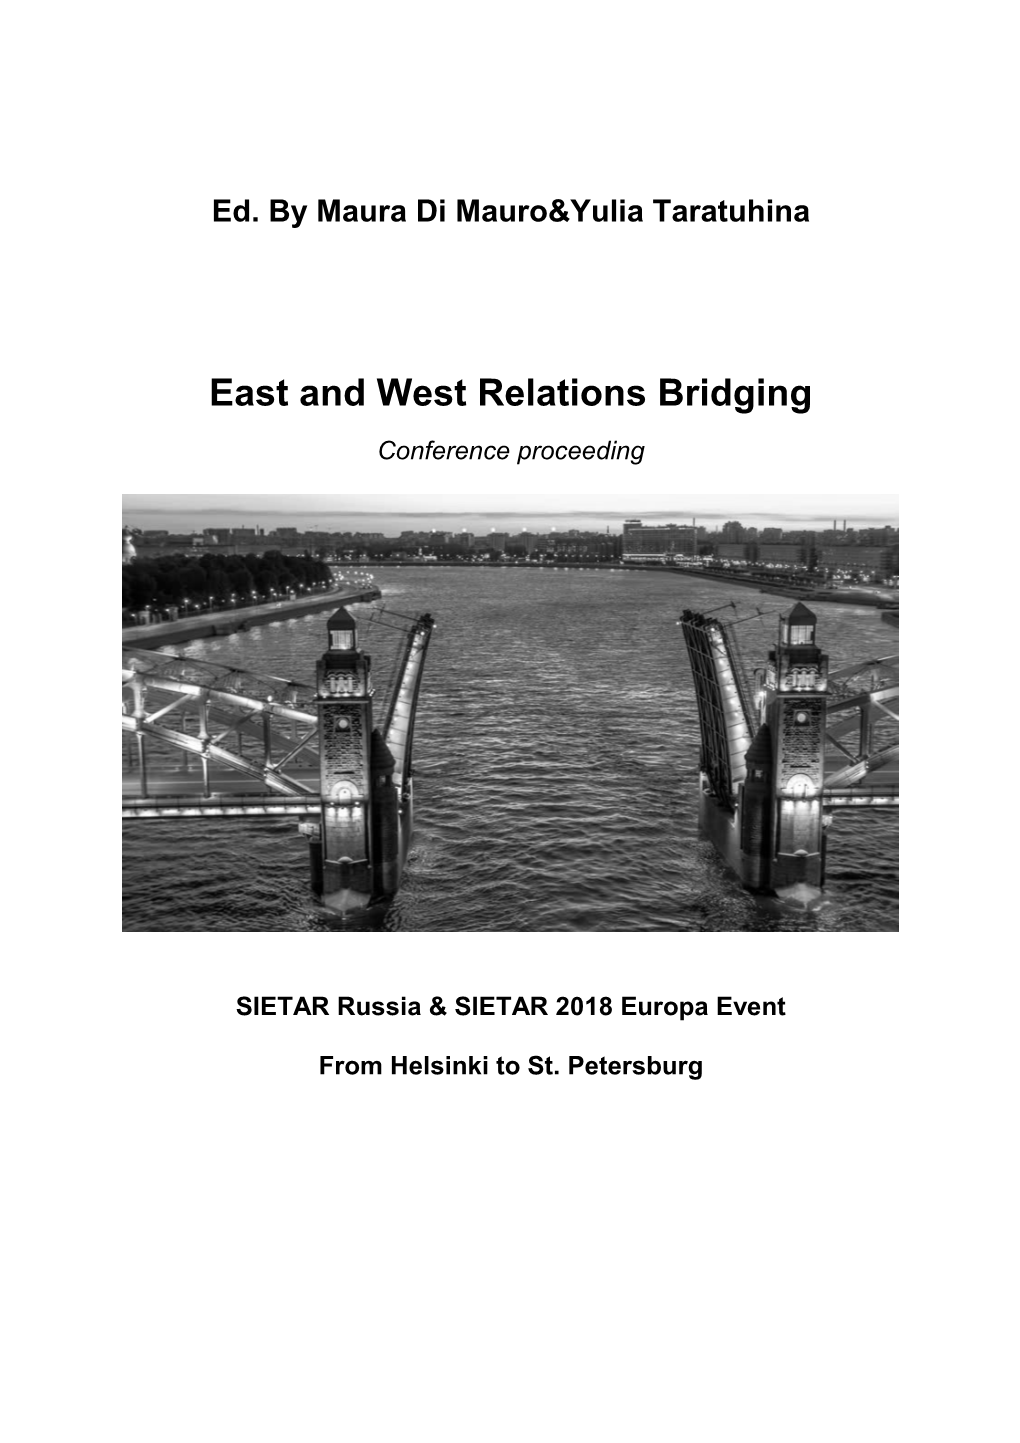 East and West Relations Bridging